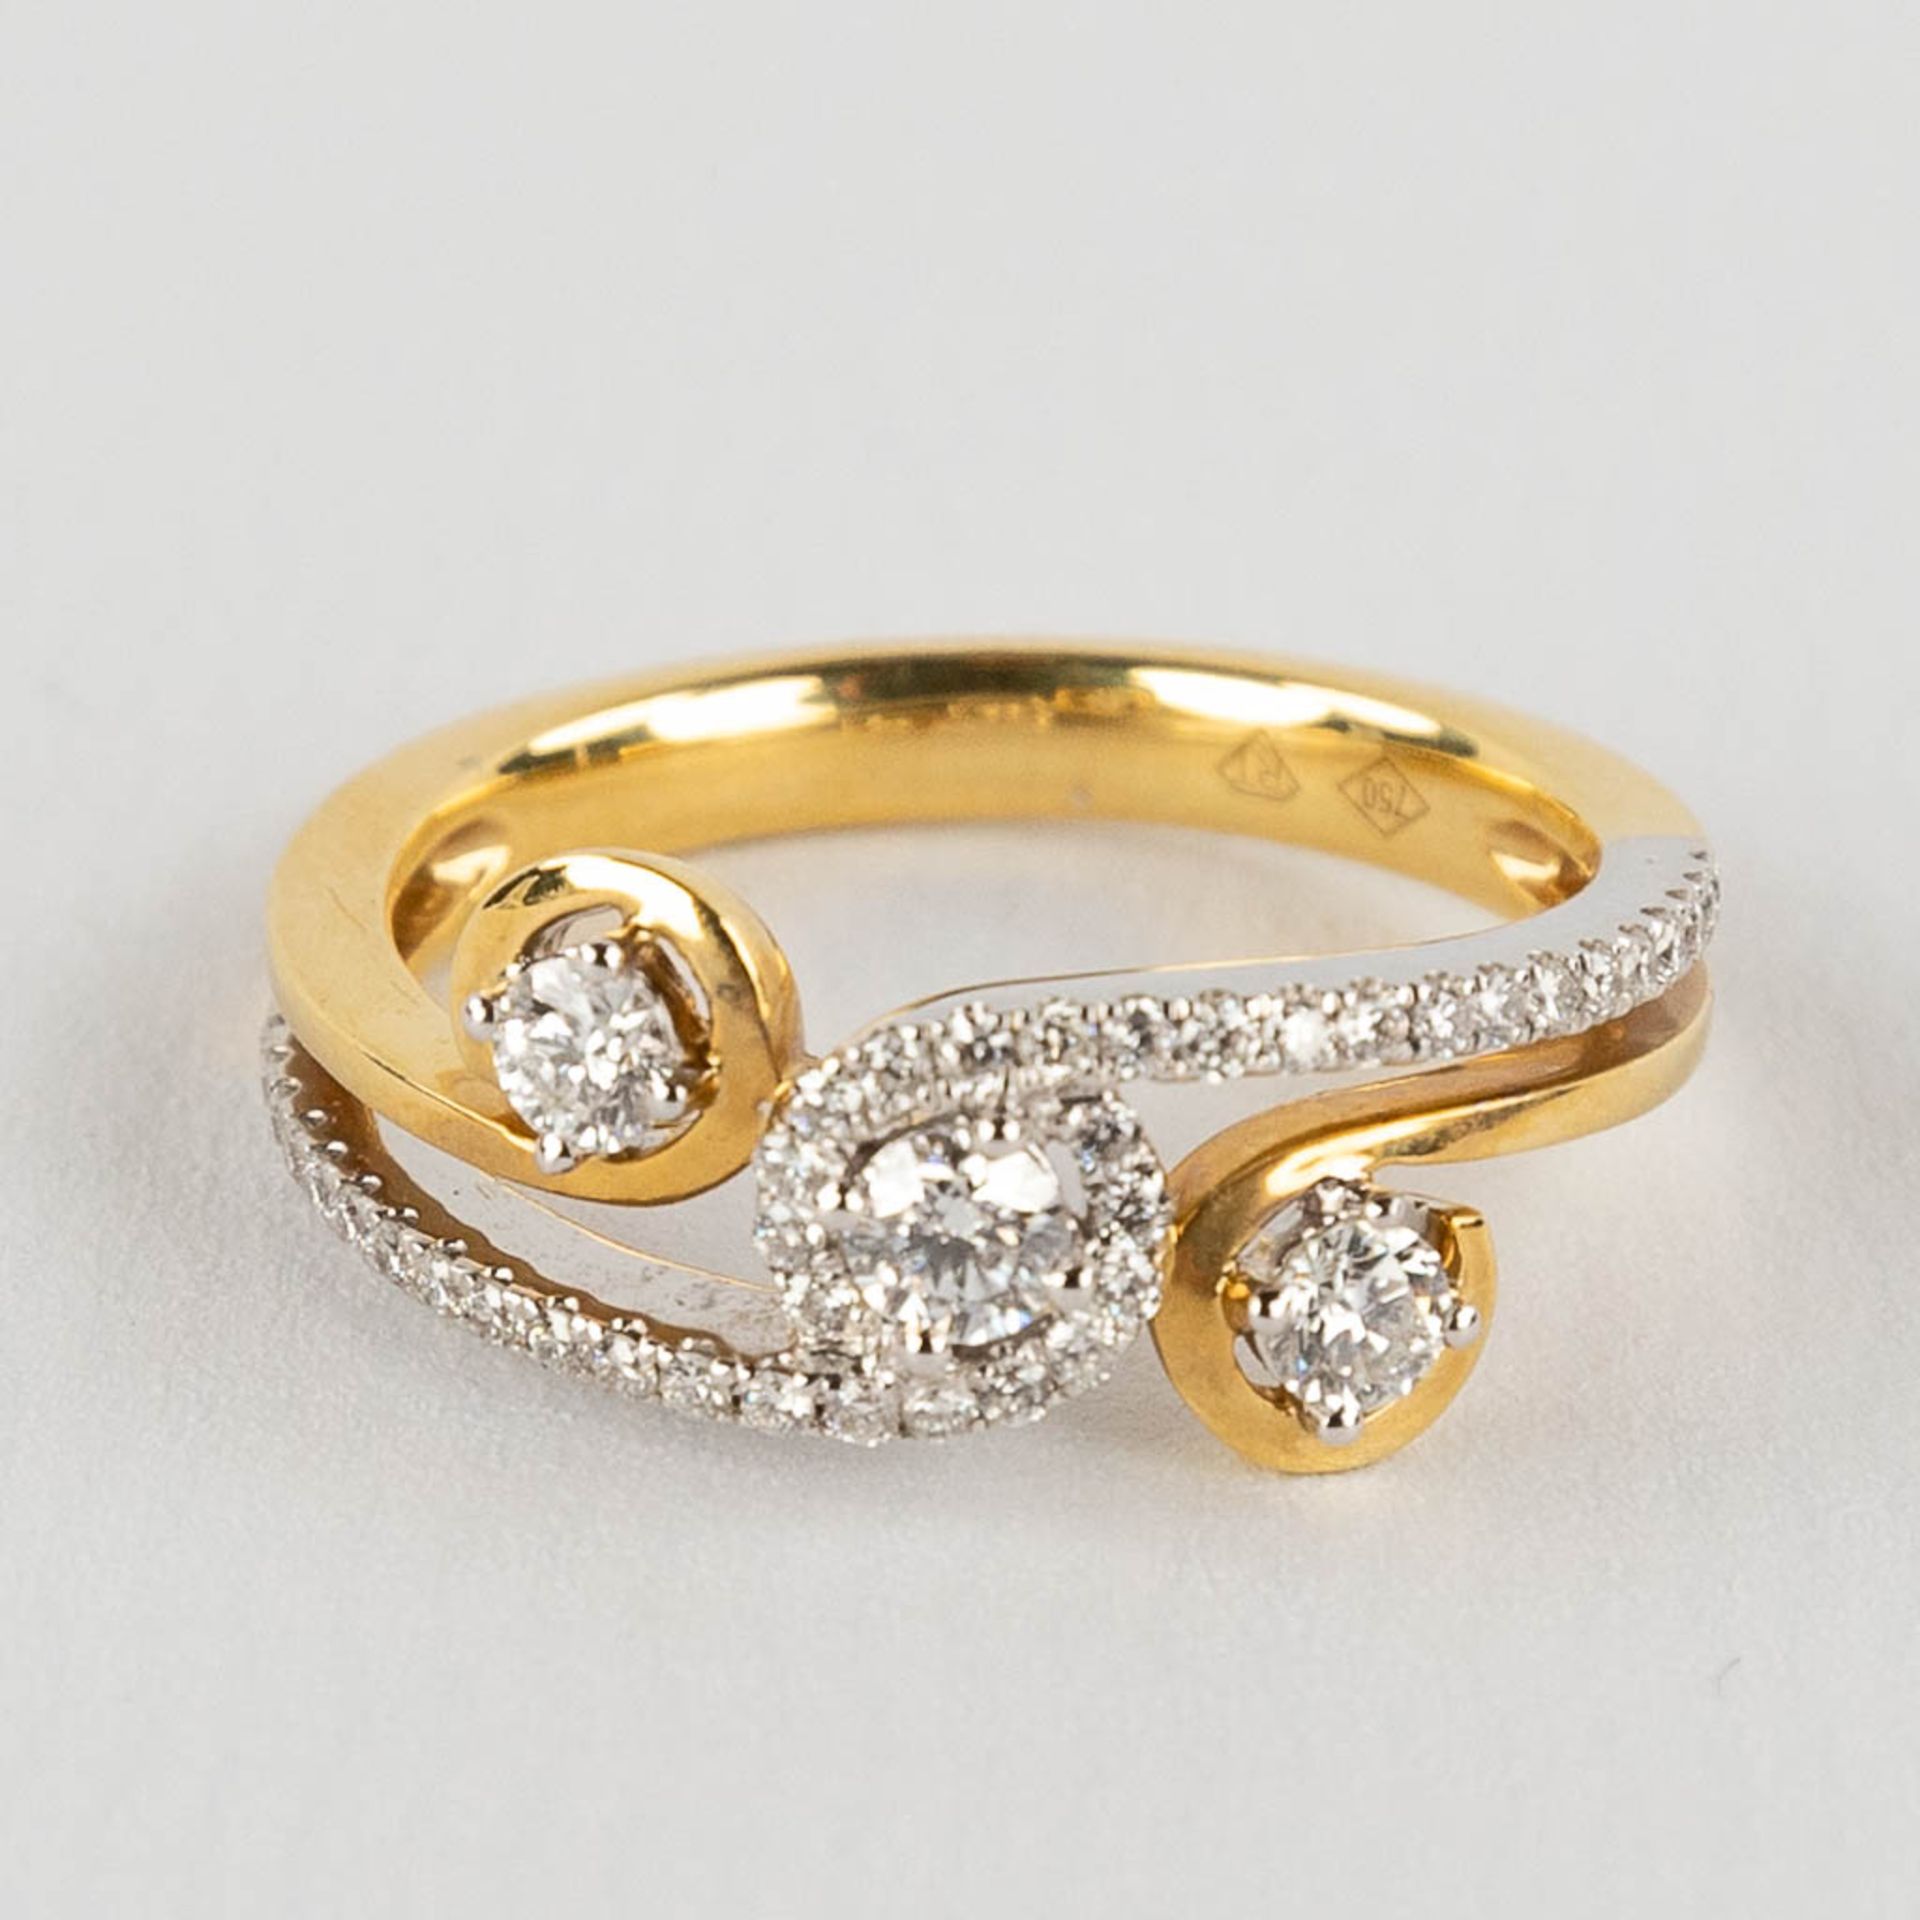 A ring, 18kt yellow and white gold with diamonds, appr. 0,48ct. Ring size 54.